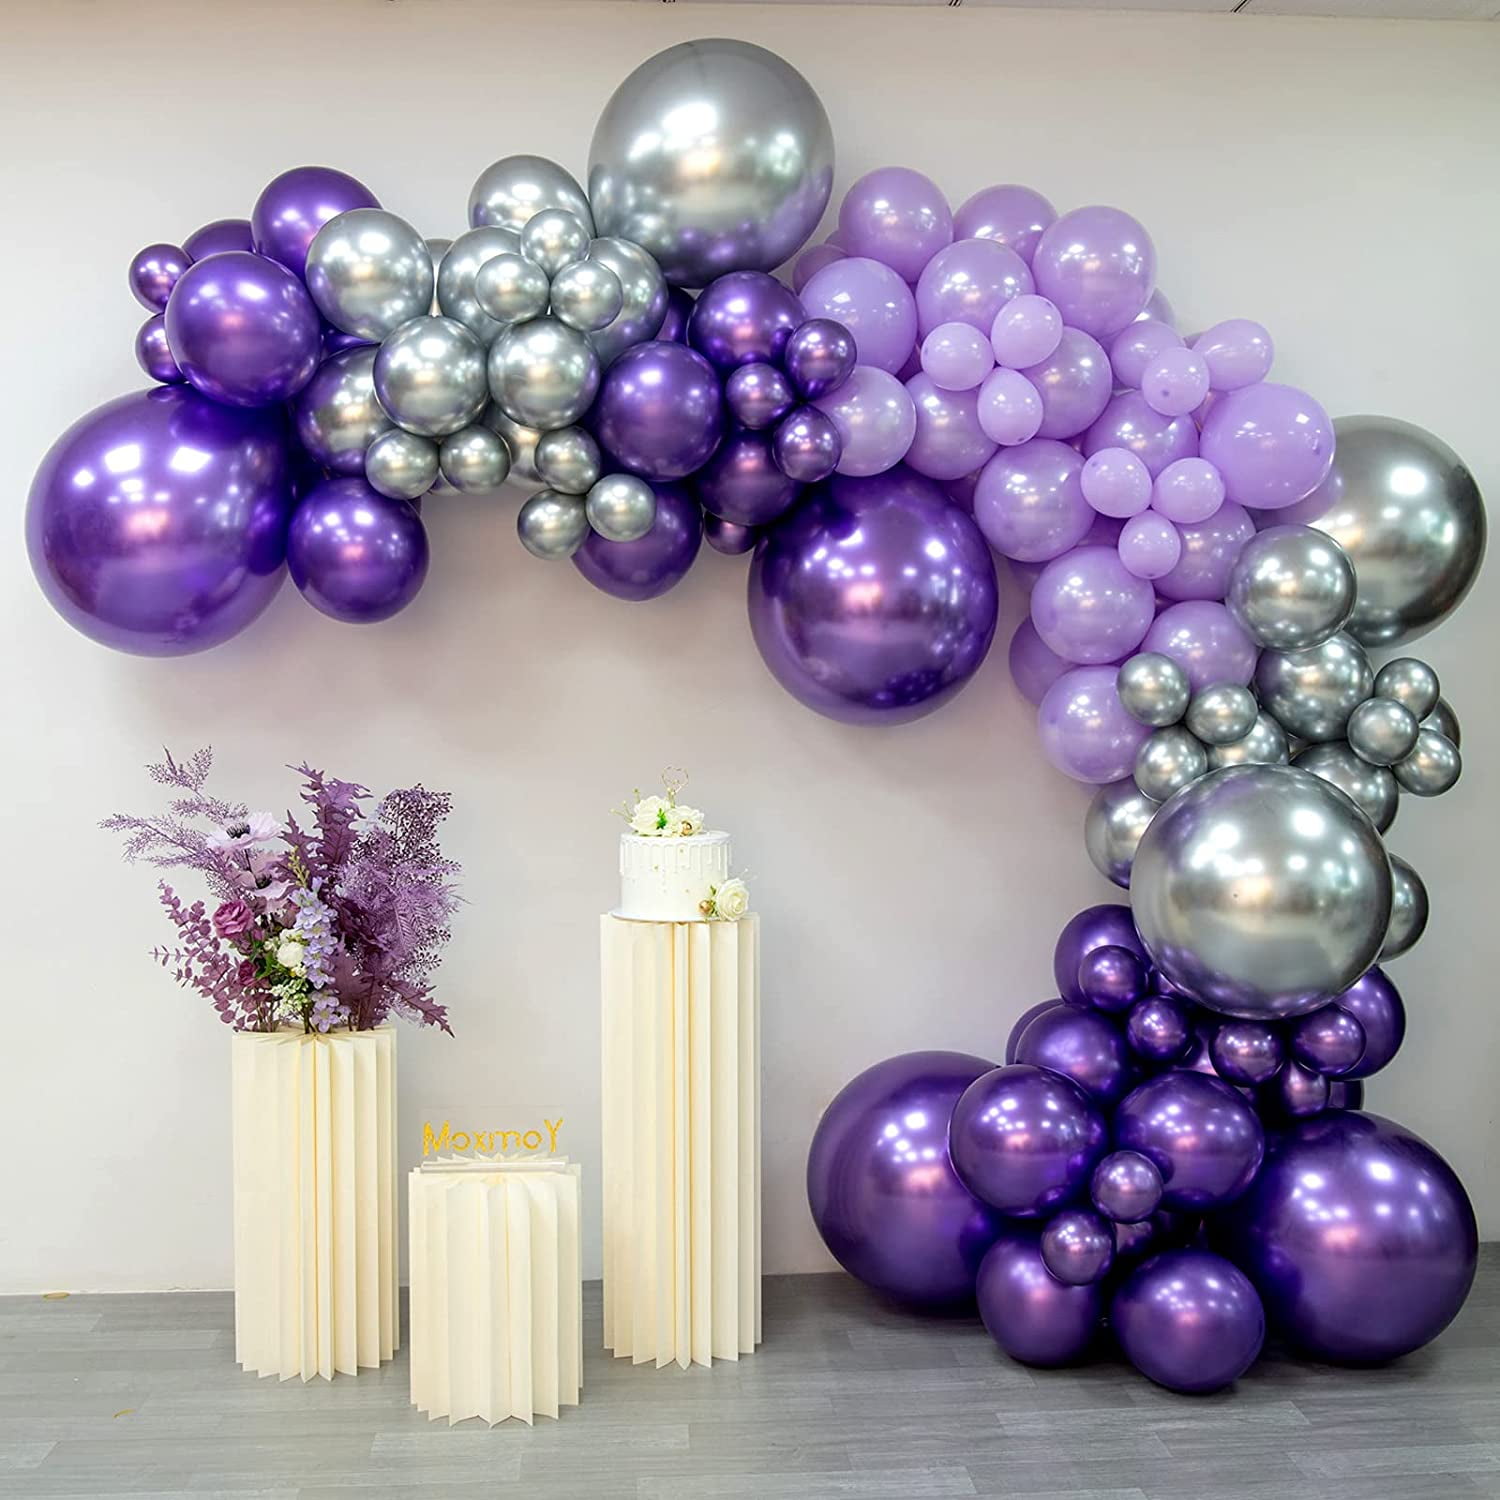 FEPITO 108 Pcs Black Silver Balloon Garland Arch Kit 5 10 12 18 Inches  Black Silver Confetti Balloons for Birthday Wedding Bridal Baby Shower